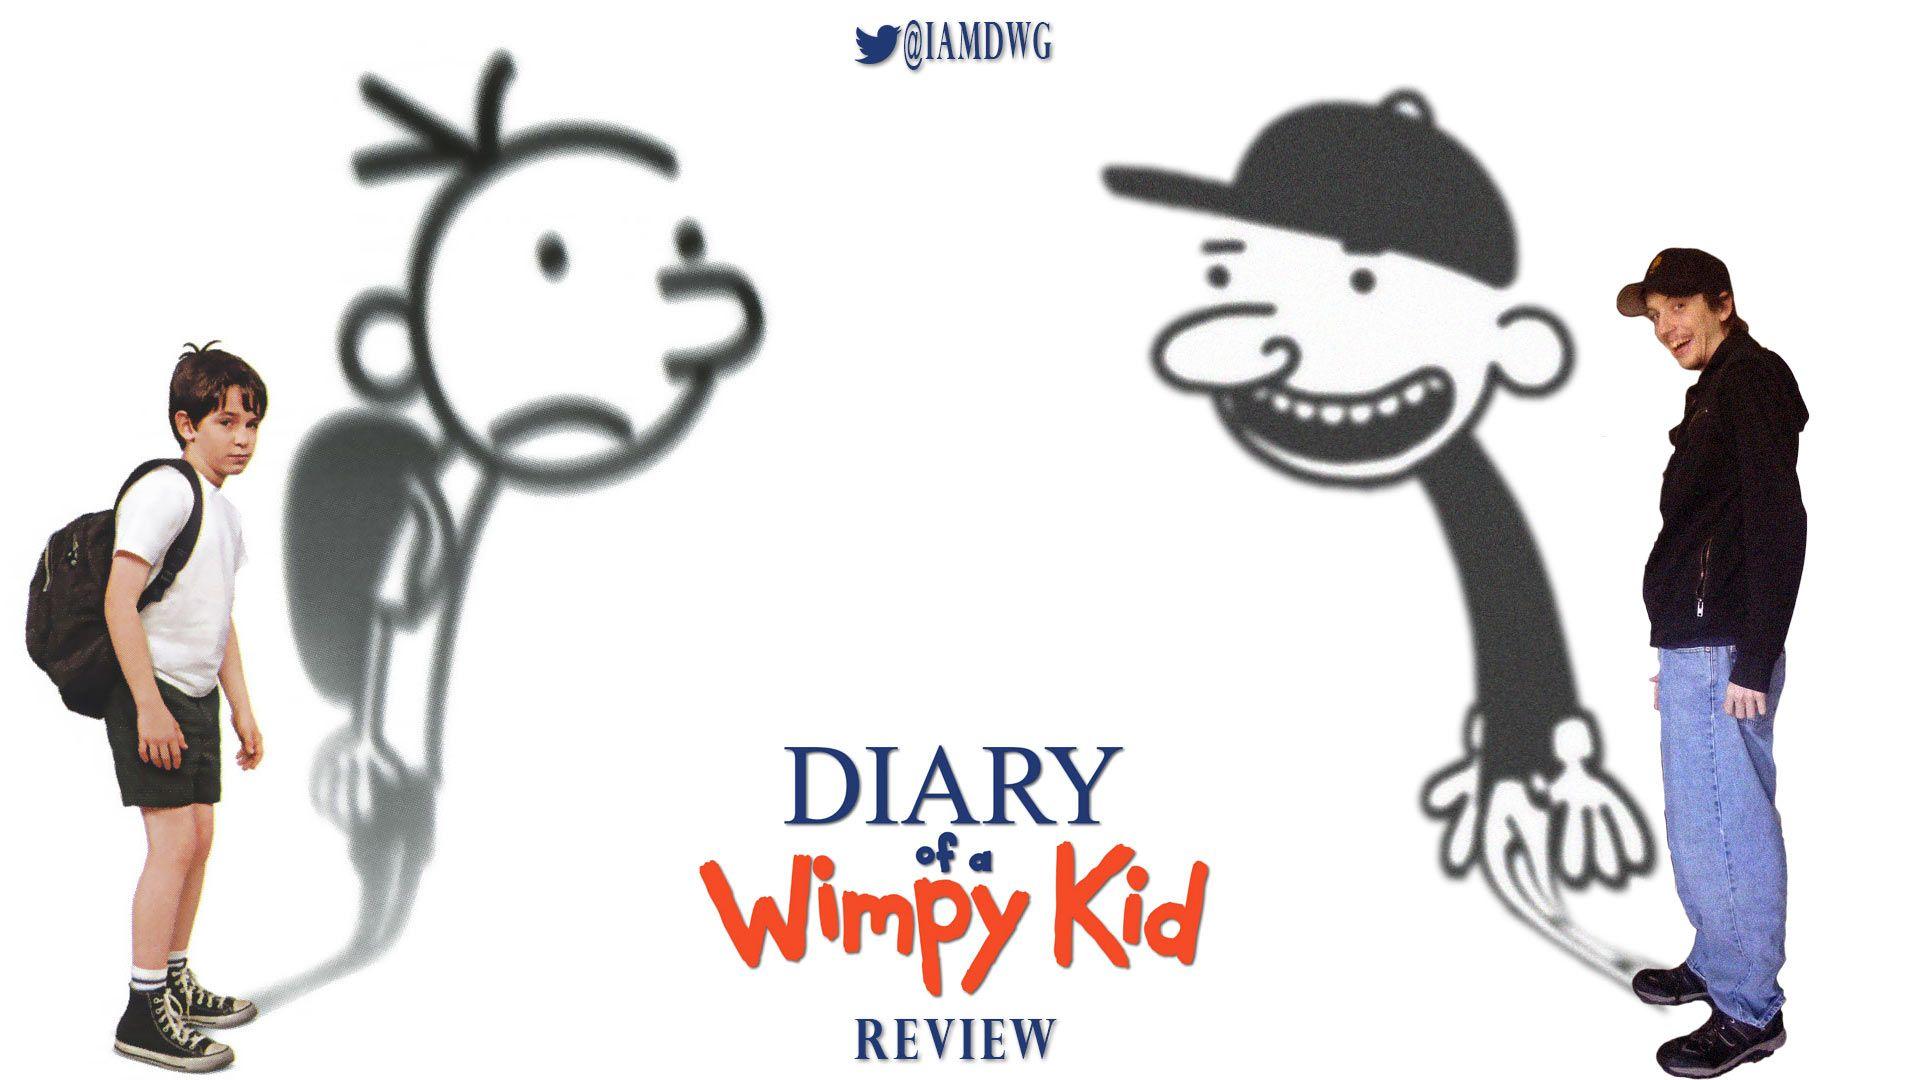 Diary of a Wimpy Kid' (2010). Dave Examines Movies